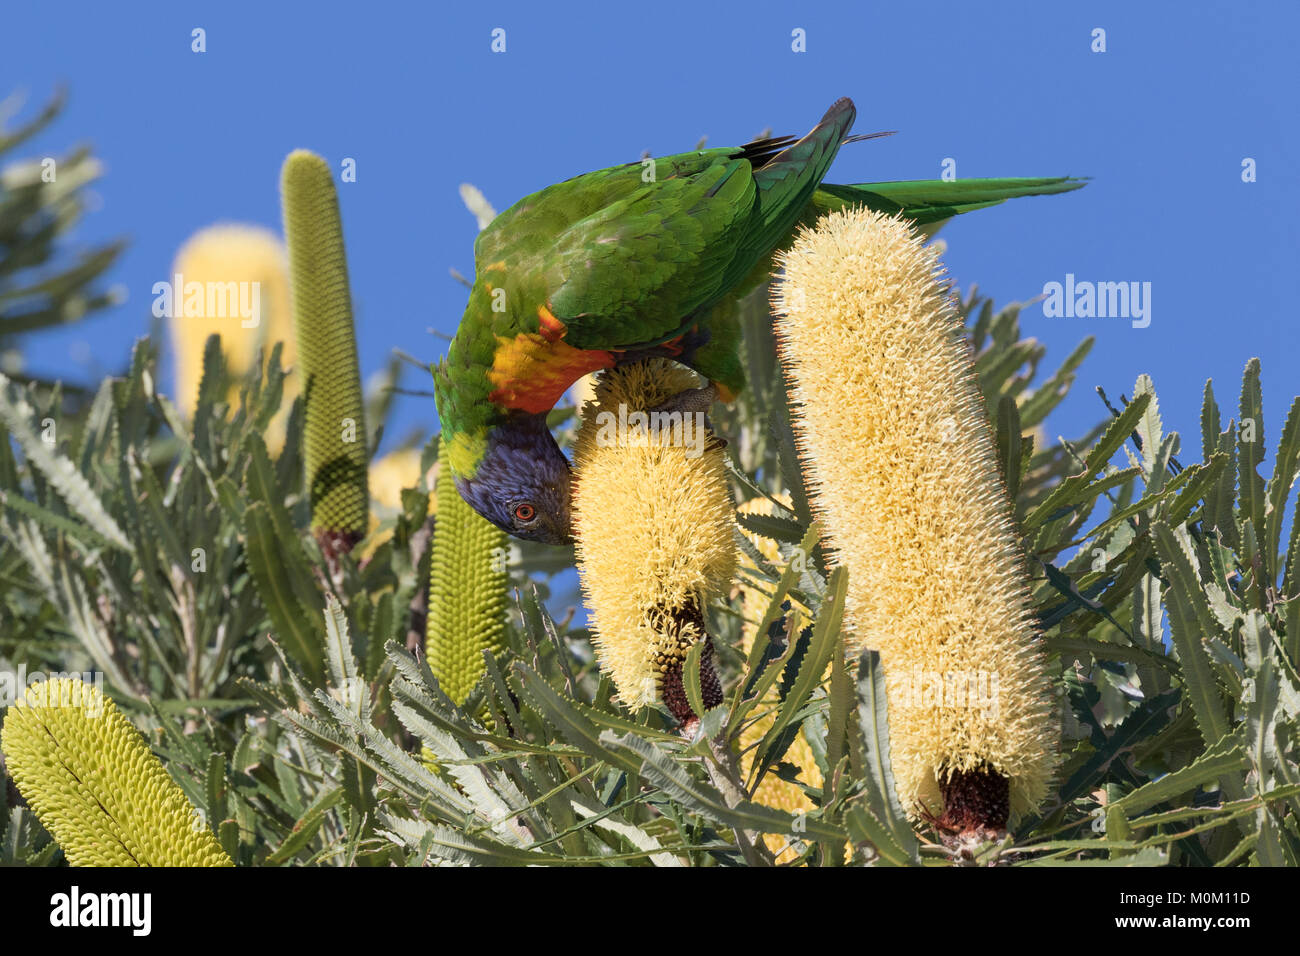 A Rainbow Lorikeet (Trichoglossus haematodus) feeding on the seeds of Candle Banksia (Banksia attenuata) in a Perth suburb, Western Australia Stock Photo